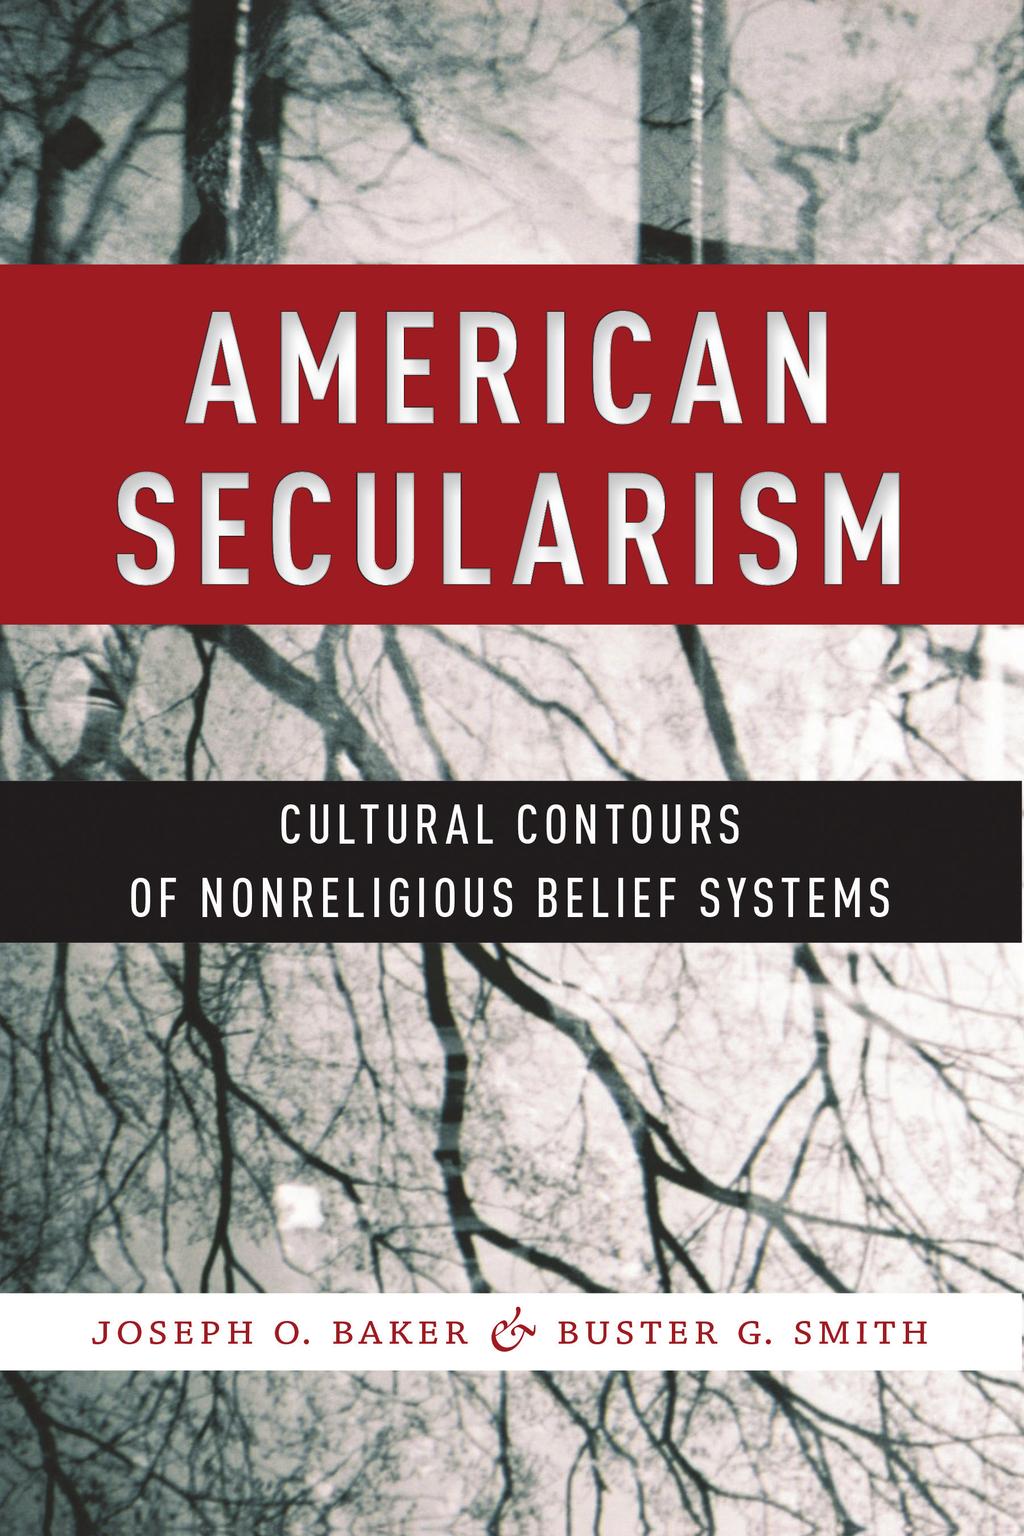 AMERICAN SECULARISM INSTRUCTOR'S GUIDE A rapidly growing number of Americans are embracing life outside the bounds of organized religion.